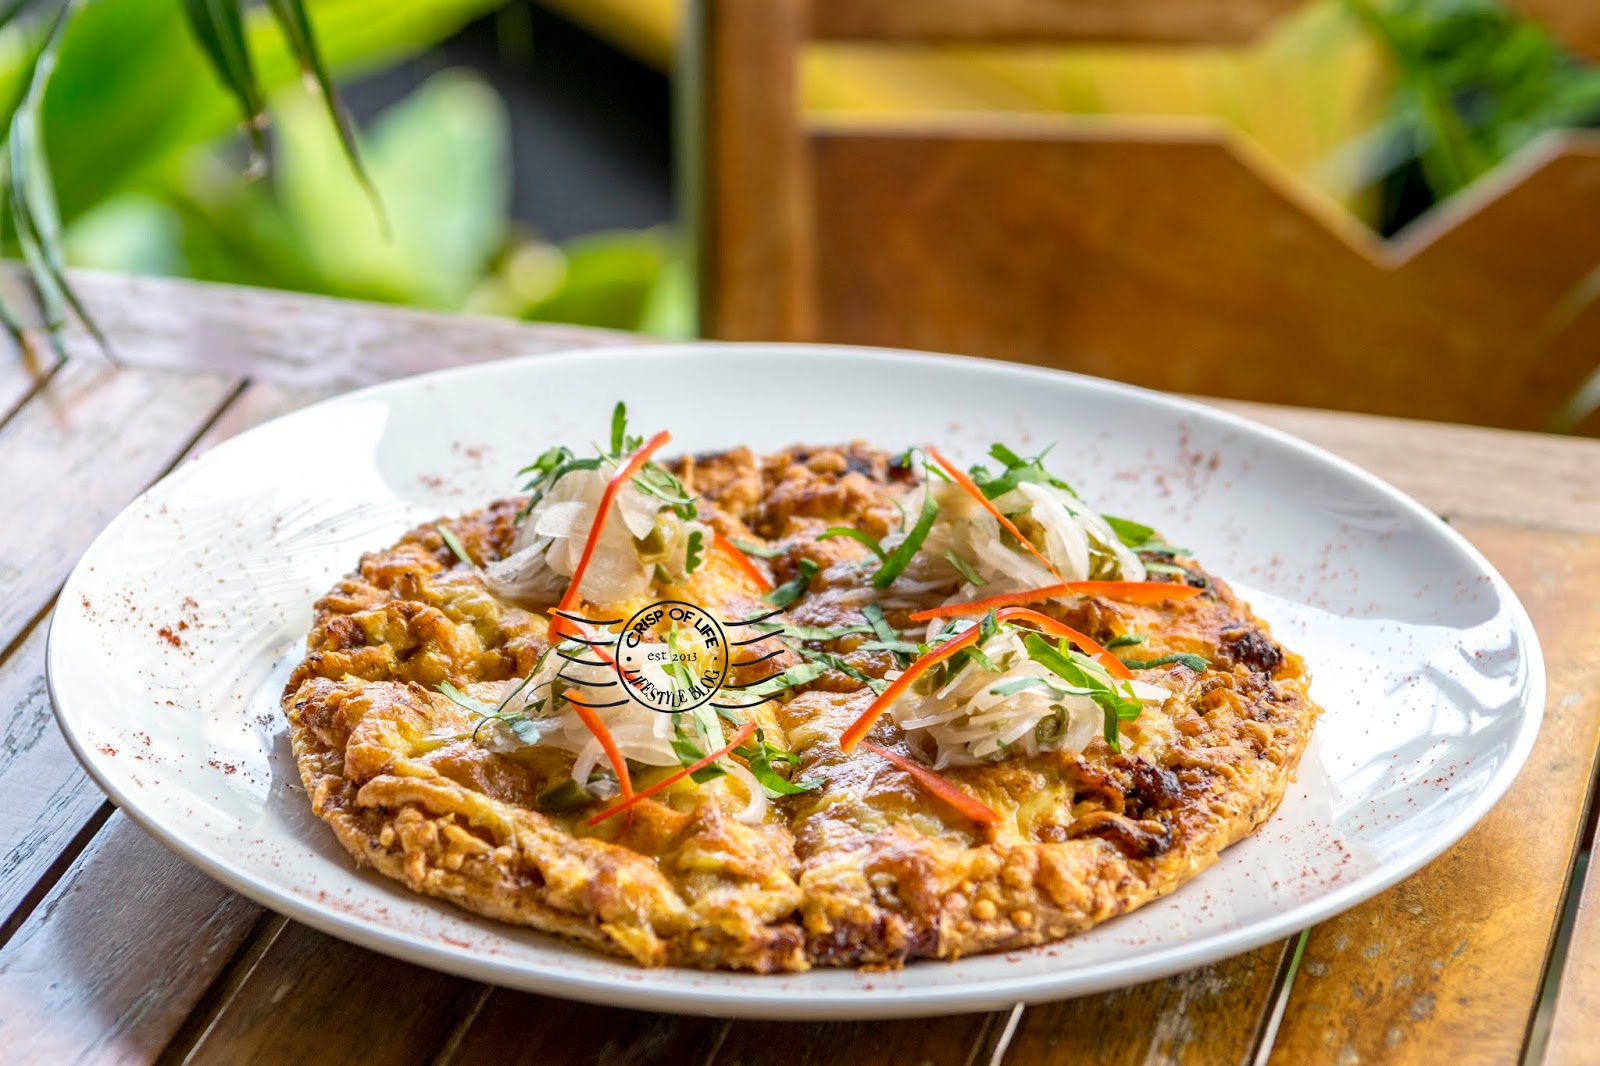 Viva Victoria at Beach Street Penang - A Premium Casual Restaurant With Round The World Cuisine